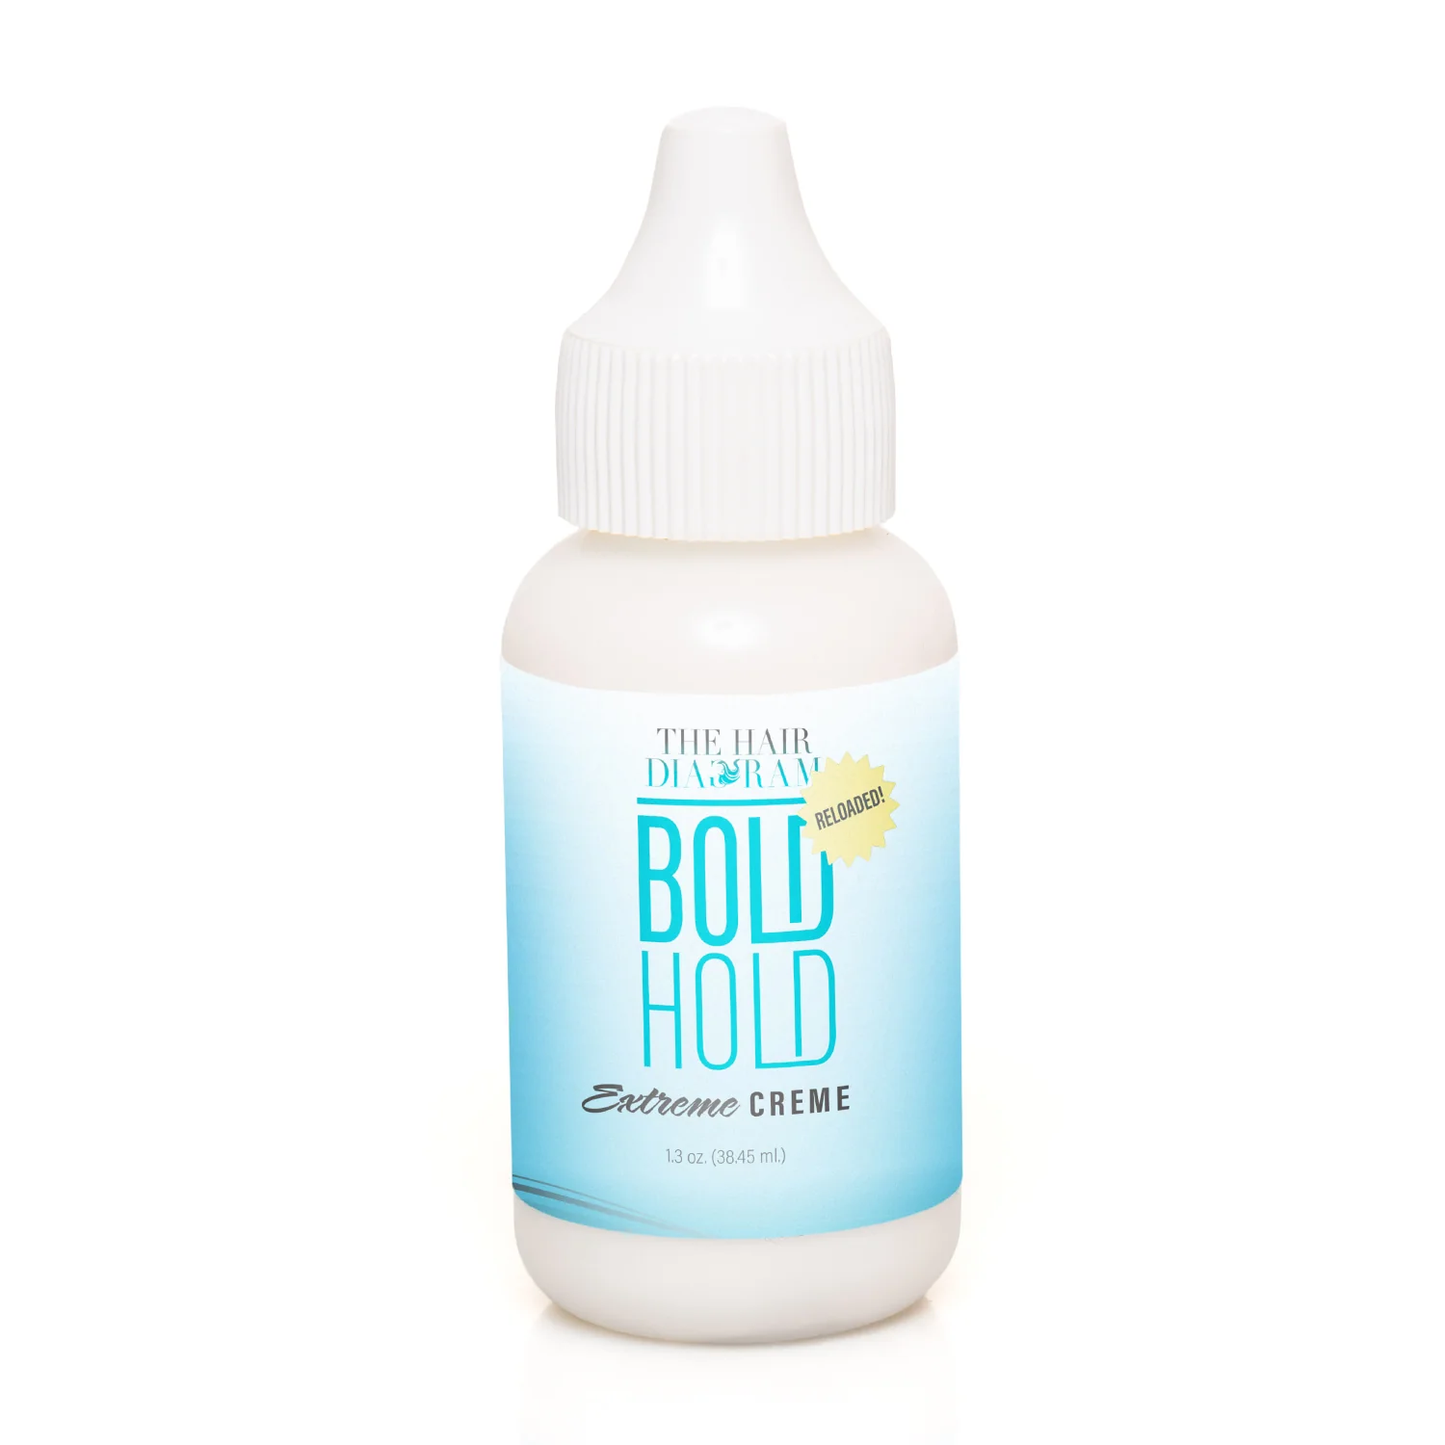 The Hair Diagram Bold Hold Extreme Creme for Dry to Normal Skin Lace Glue 1.3 oz